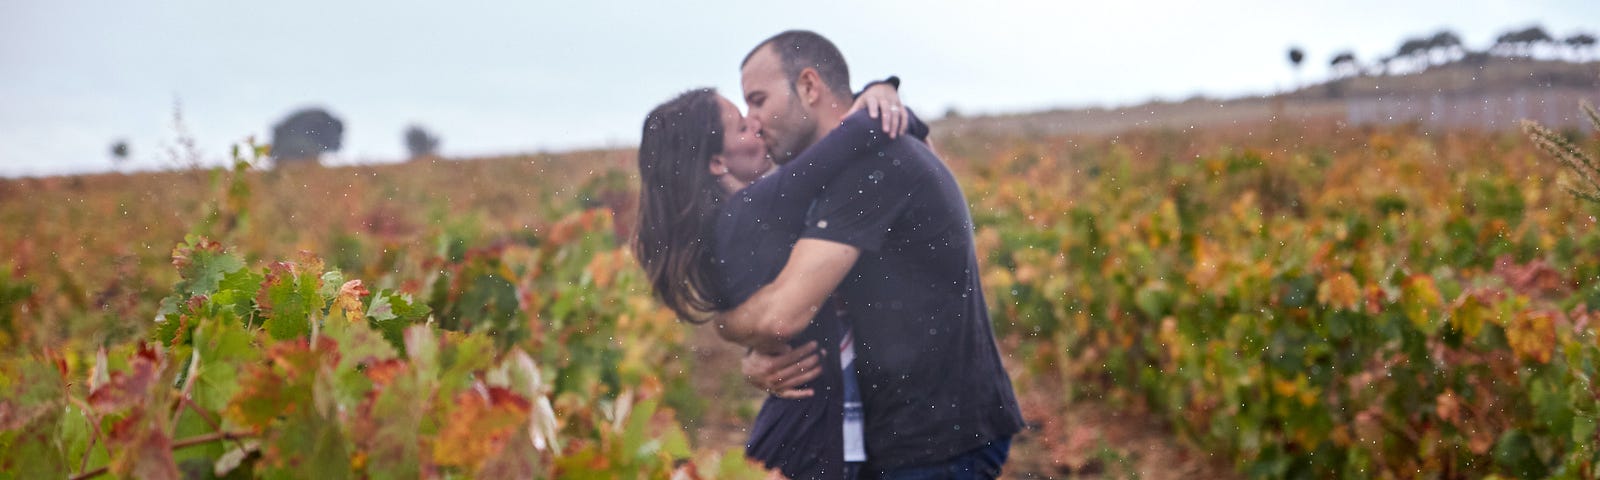 A man and a woman kiss in an outdoor field.